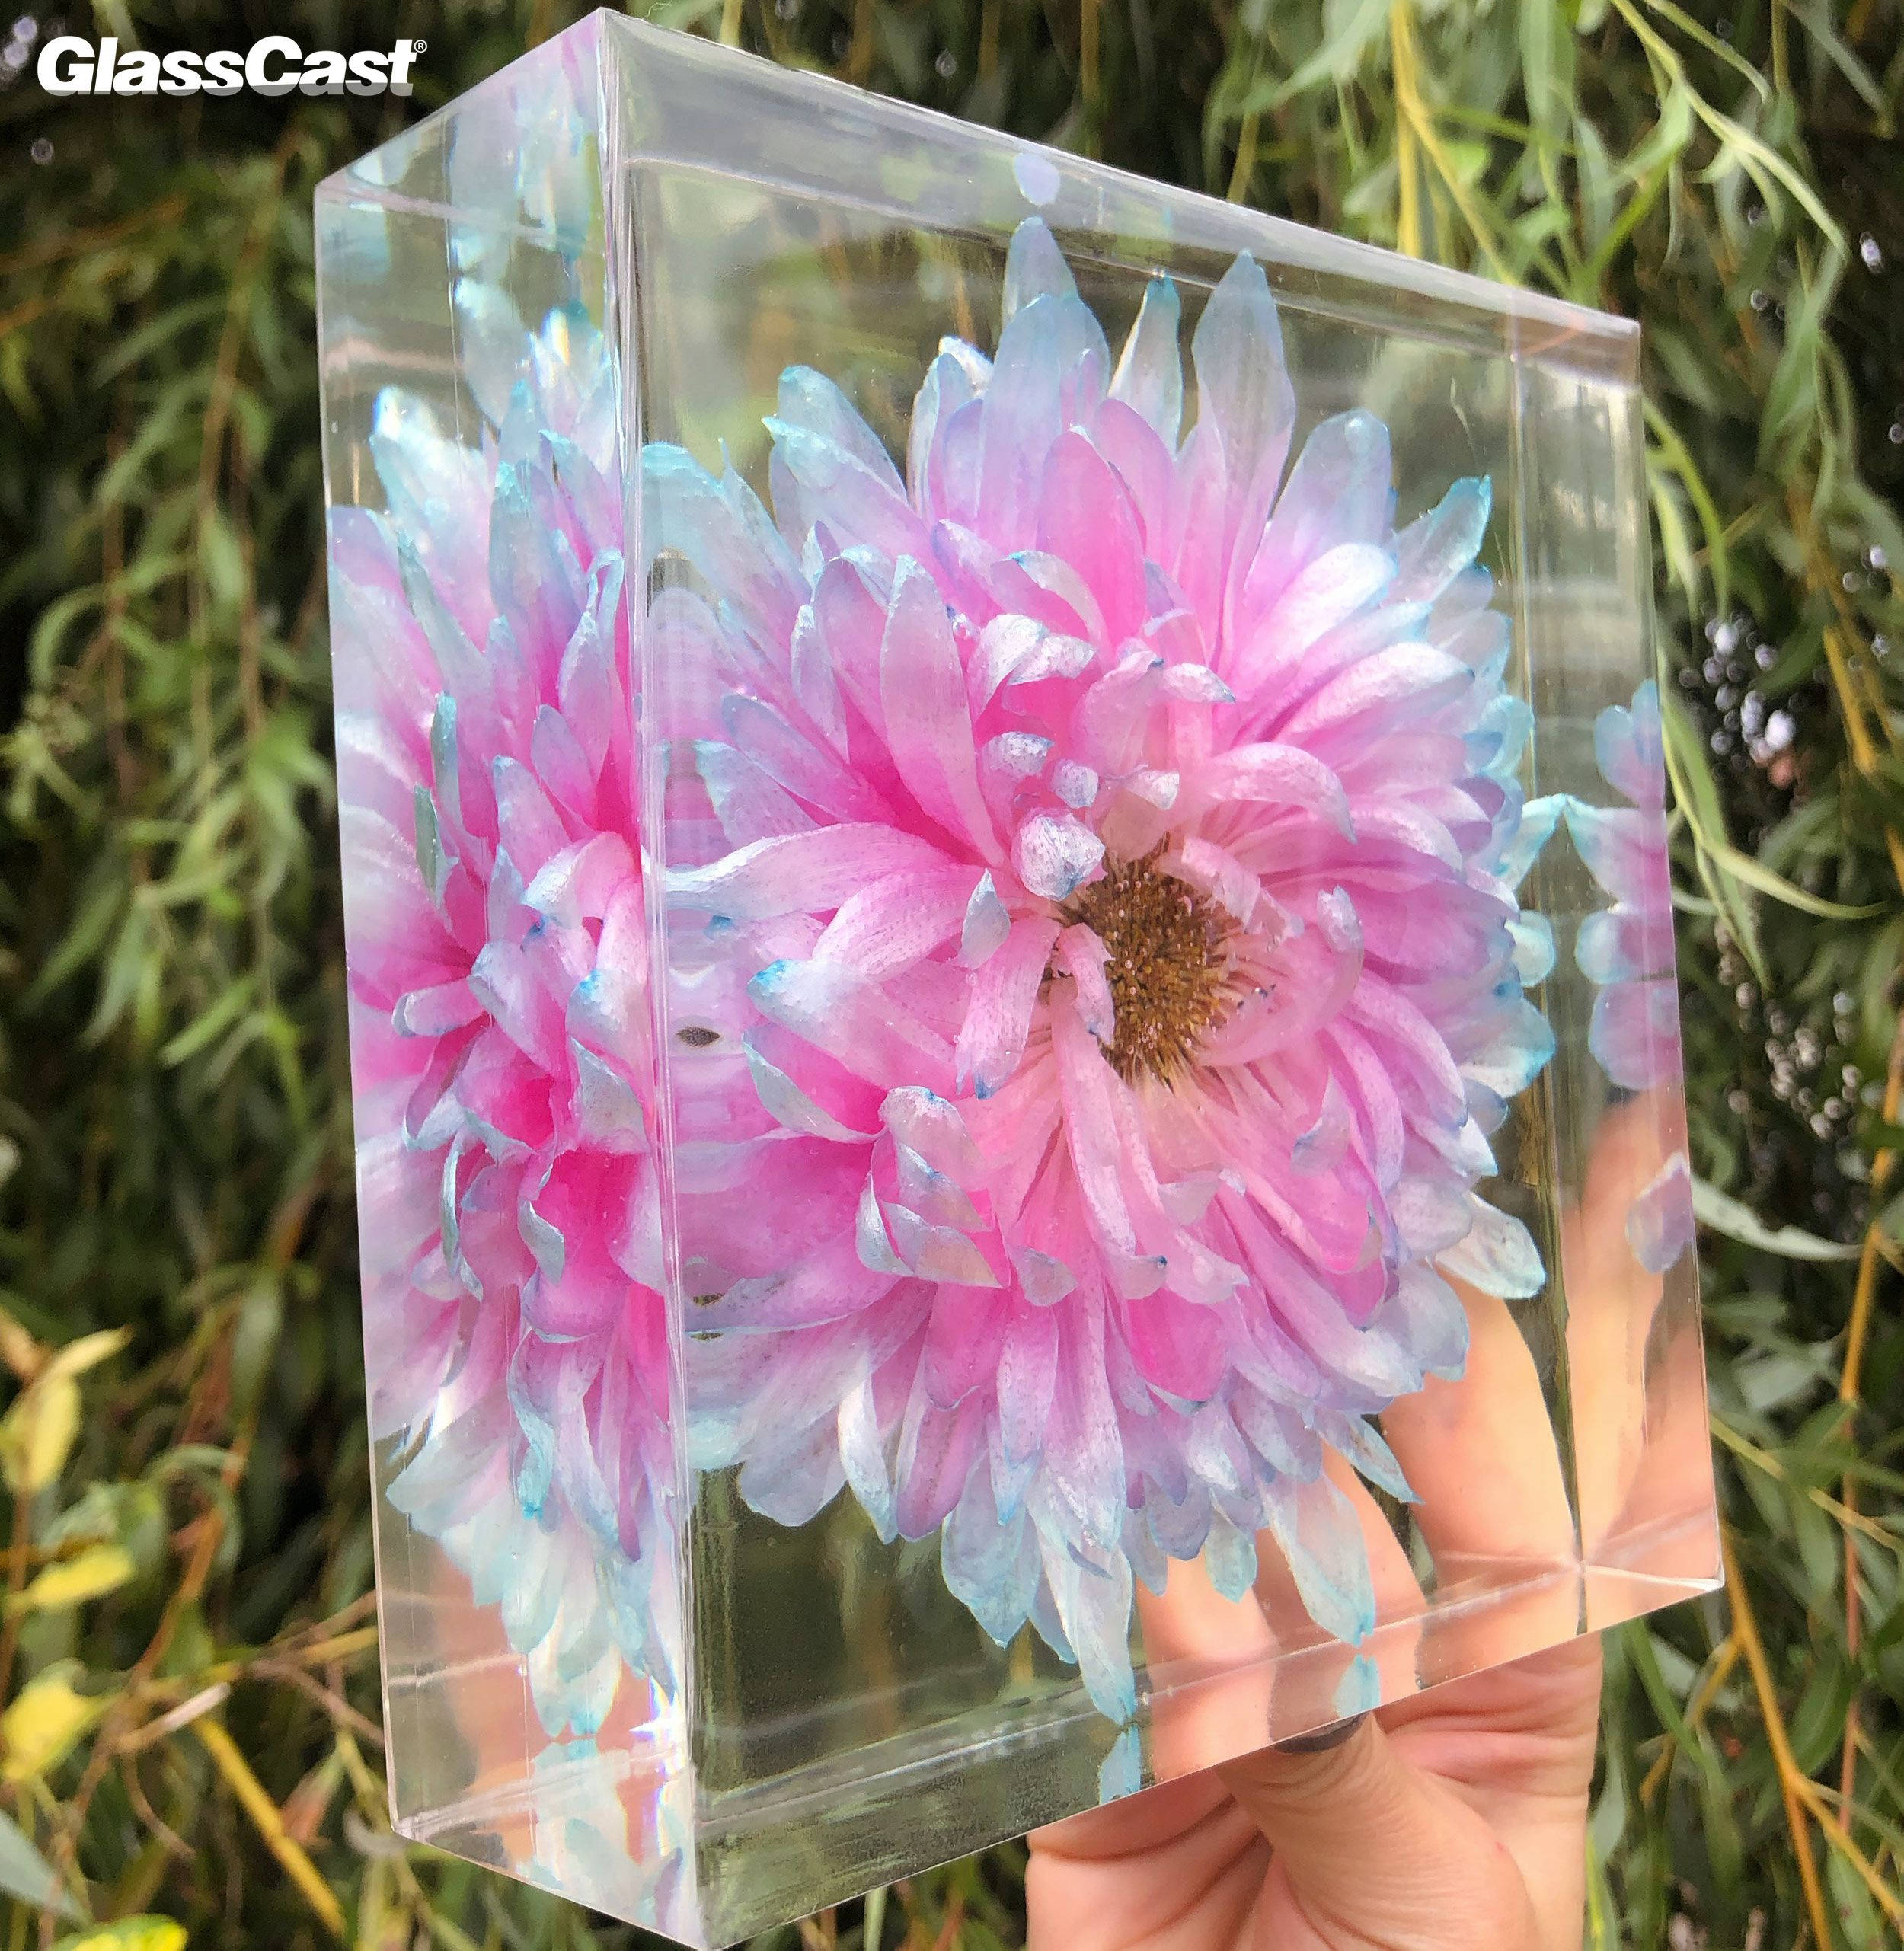 https://media.glasscastresin.com/products/extralarge/Bea-utiful-creations-dinner-plate-dahlia-in-resin-side-view